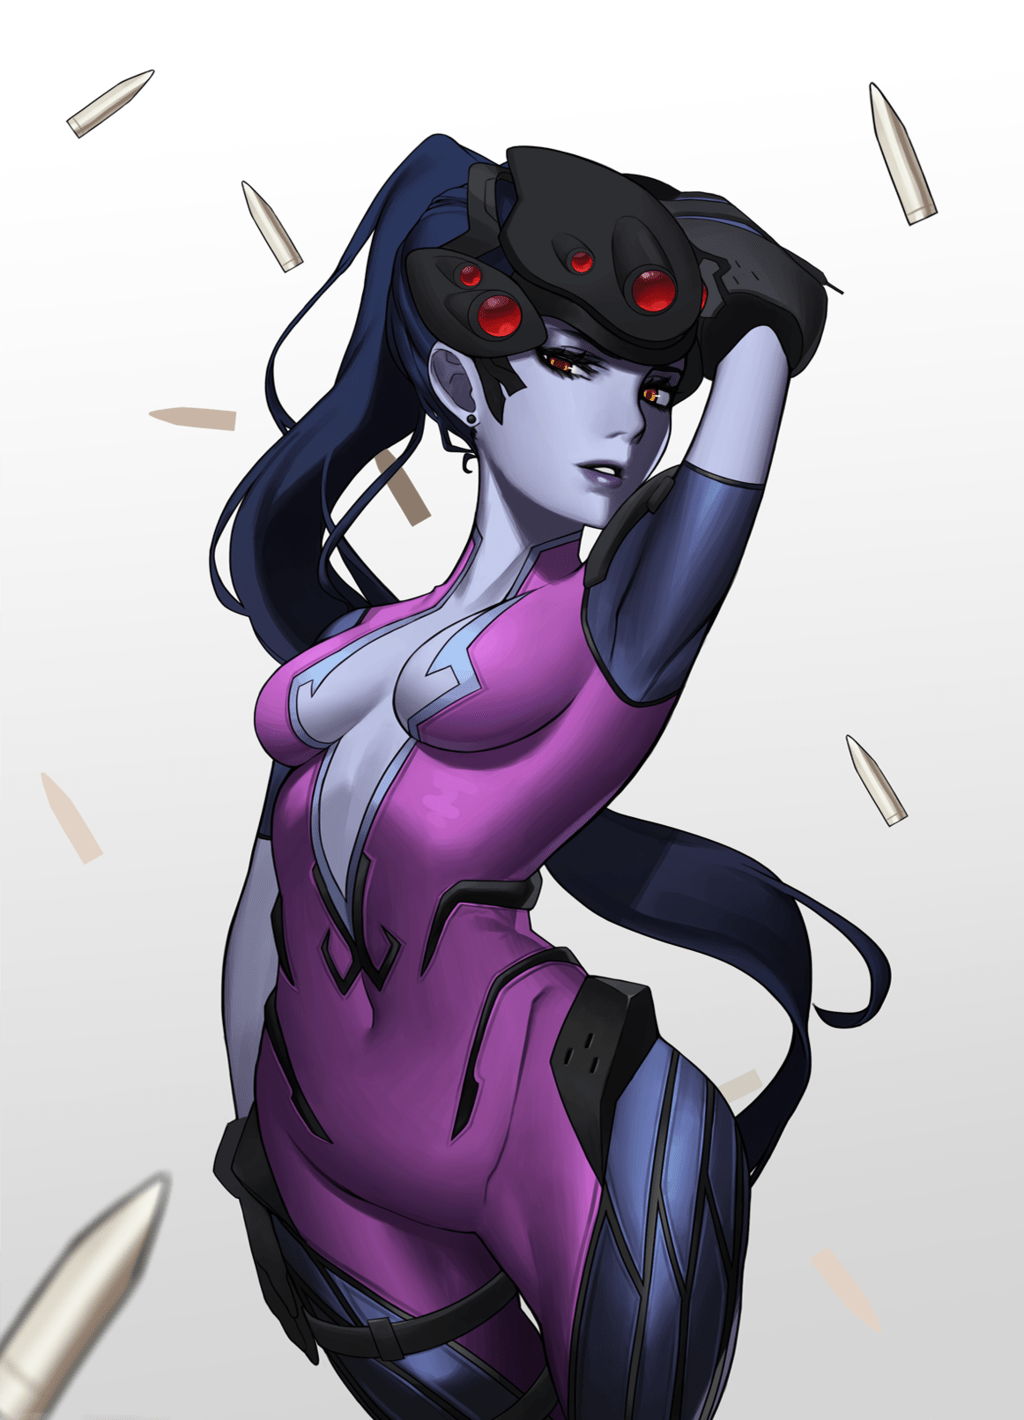 55+ Hot Pictures Of Widowmaker From Overwatch | Best Of Comic Books